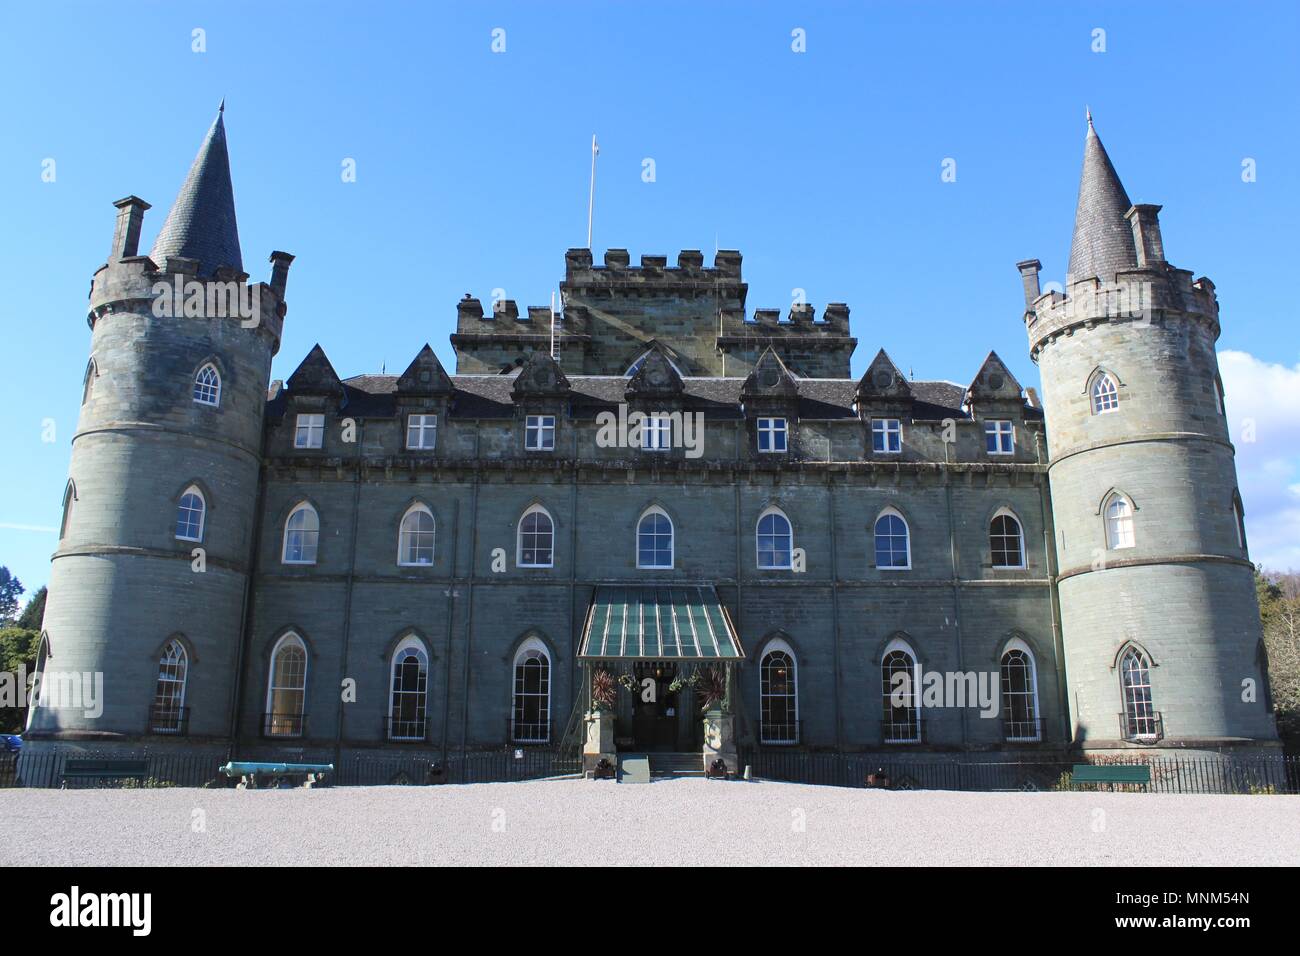 Inveraray Castle built in Gothic Revival style, has been the seat of the Dukes of Argyll, chiefs of Clan Campbell, since the 18th century Stock Photo